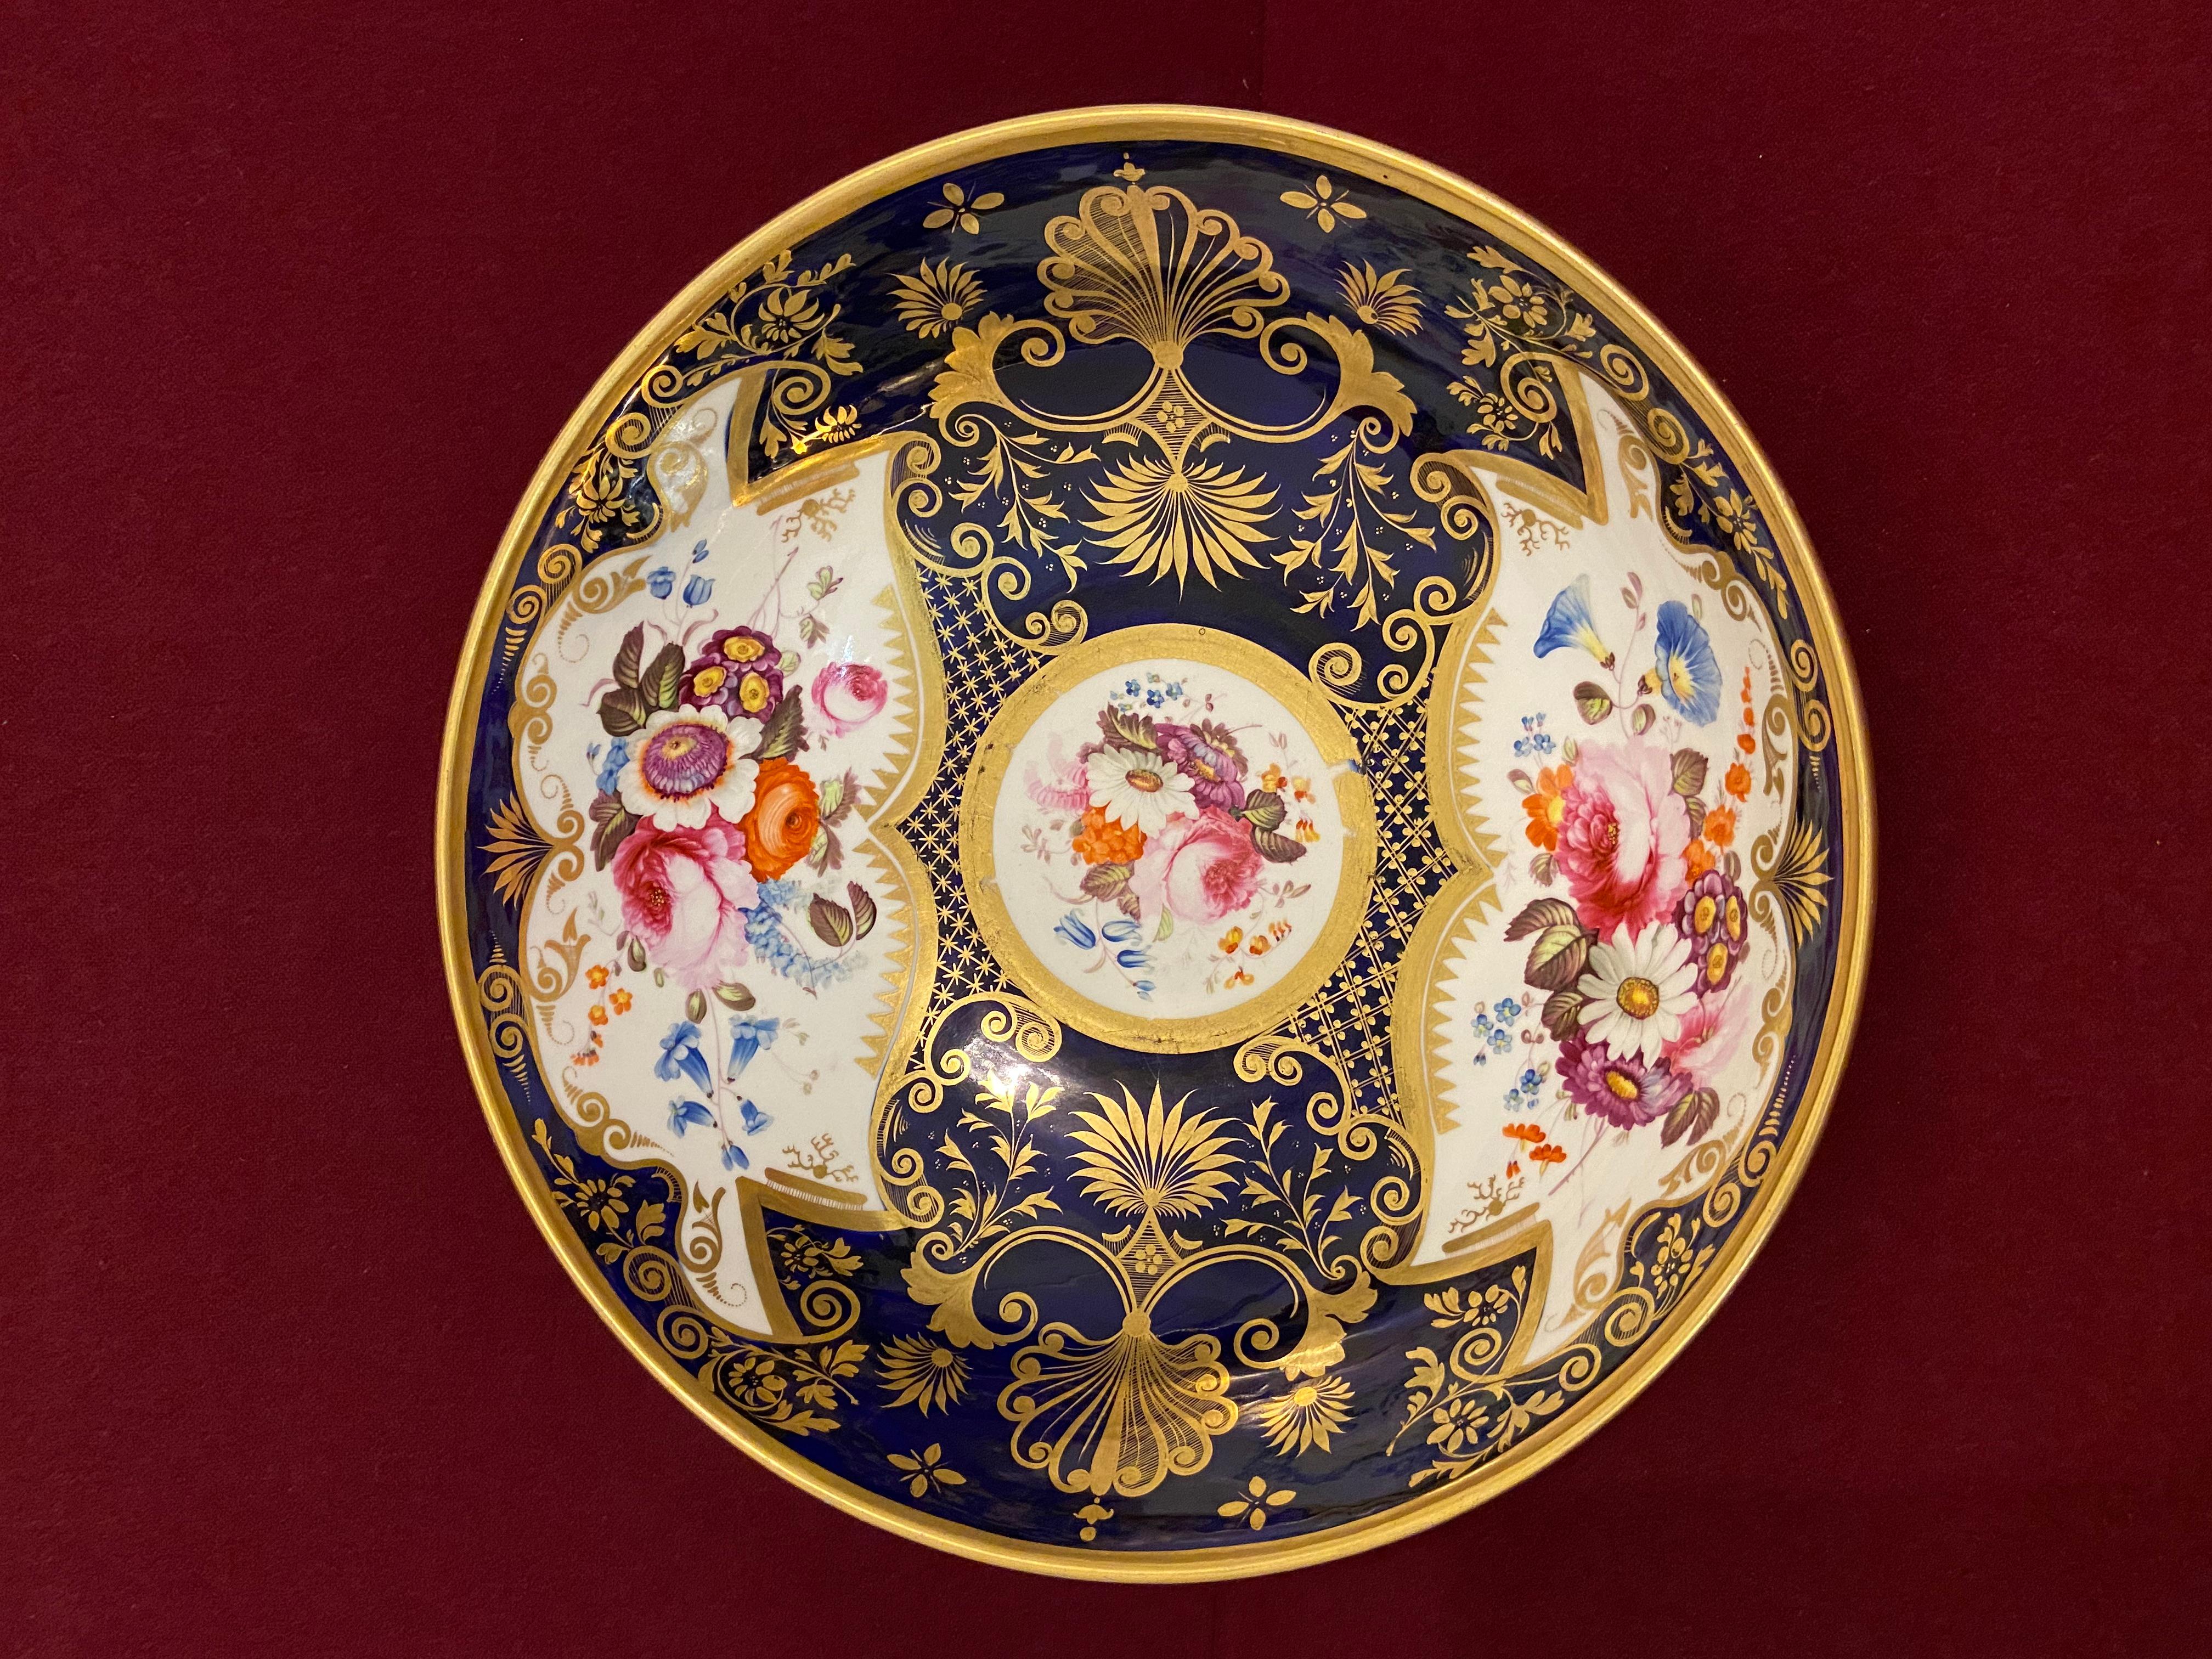 A fine Coalport porcelain punch bowl c.1820. Decorated with panels of flowers on a rich cobalt blue ground with richly embelished gilt decoration:

Condition: Two very small rim chips to the foot.